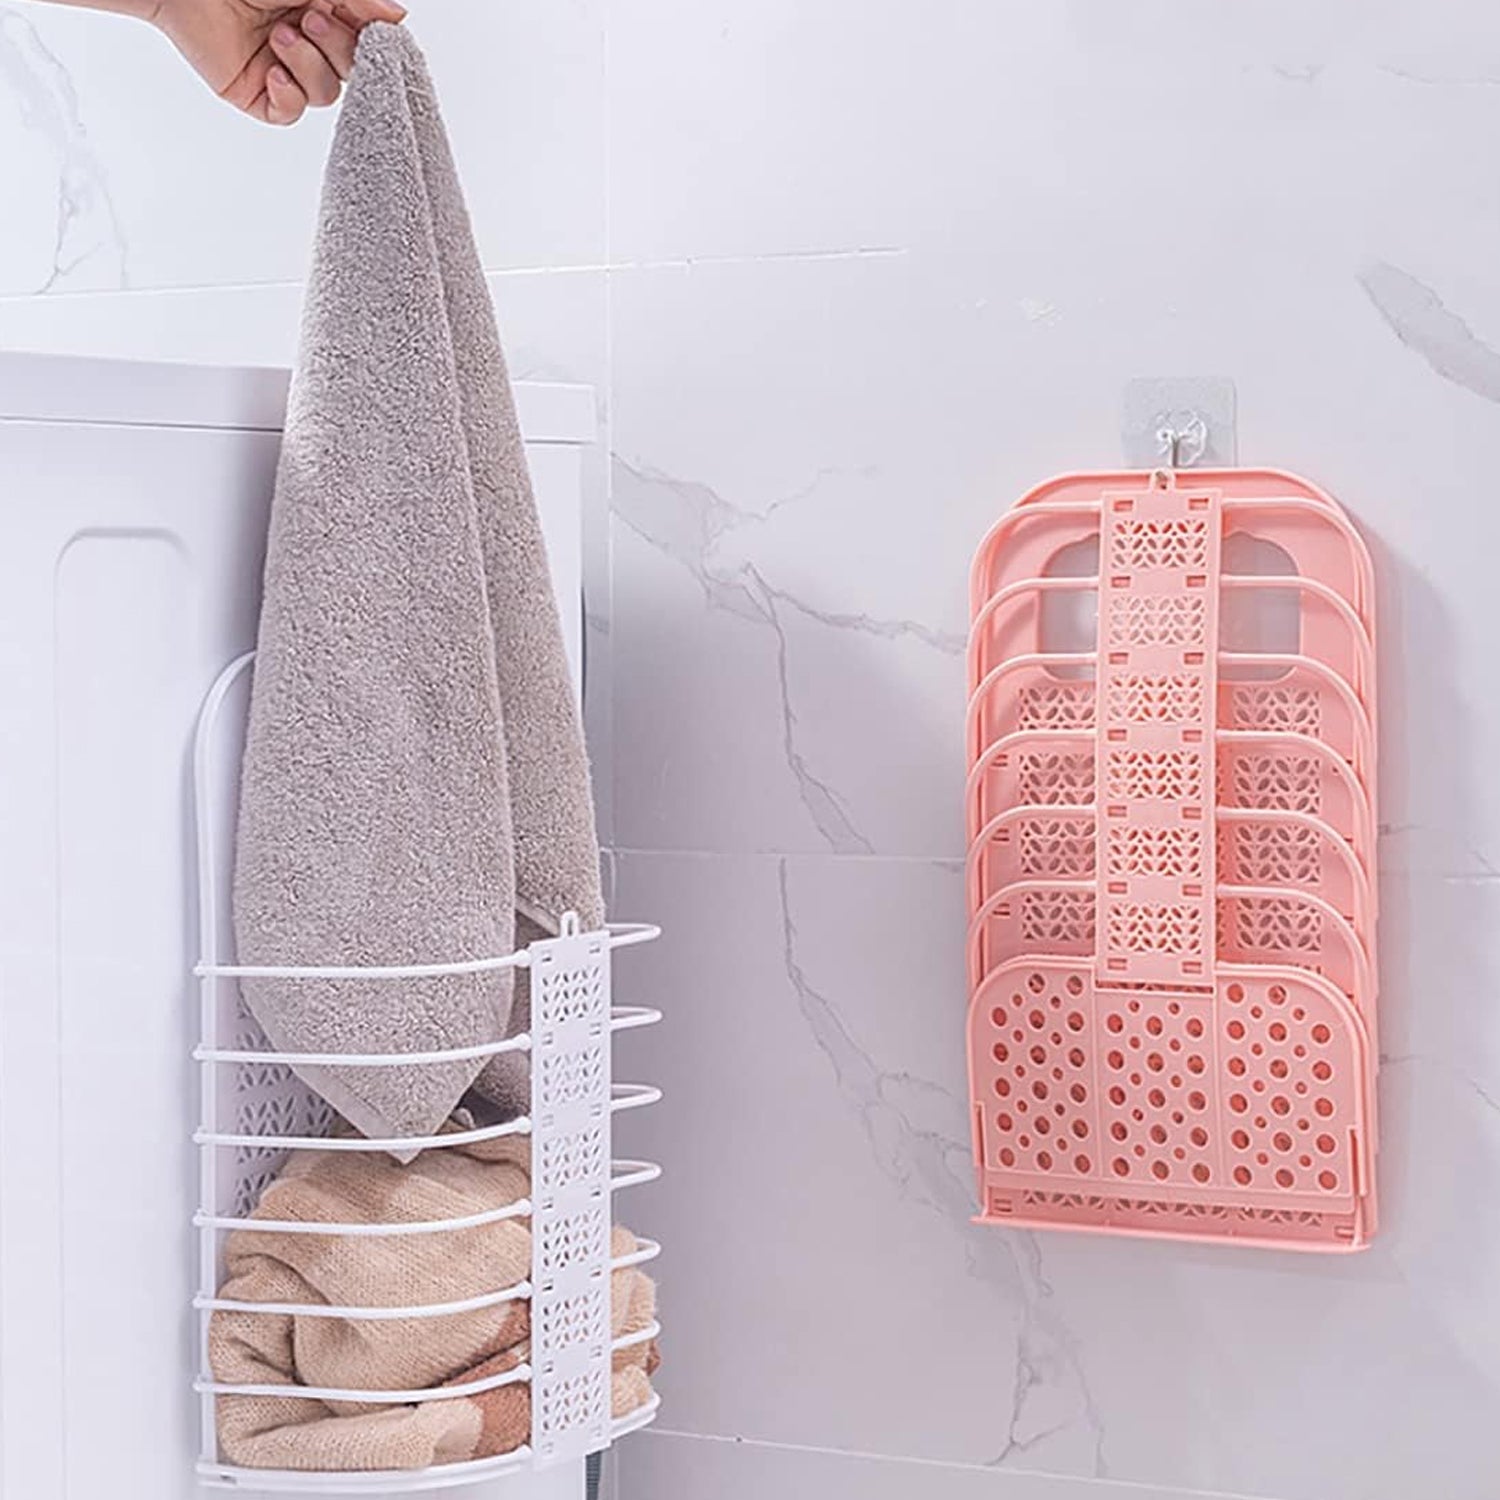 8145 Wall Hanging Laundry Basket Clothes Hanger Dirty Hamper Clothes Storage Hook Clothes Rails for Laundry Washing Machine Bathroom Kids Dirty Clothes Storage Hanger (1 Pc)